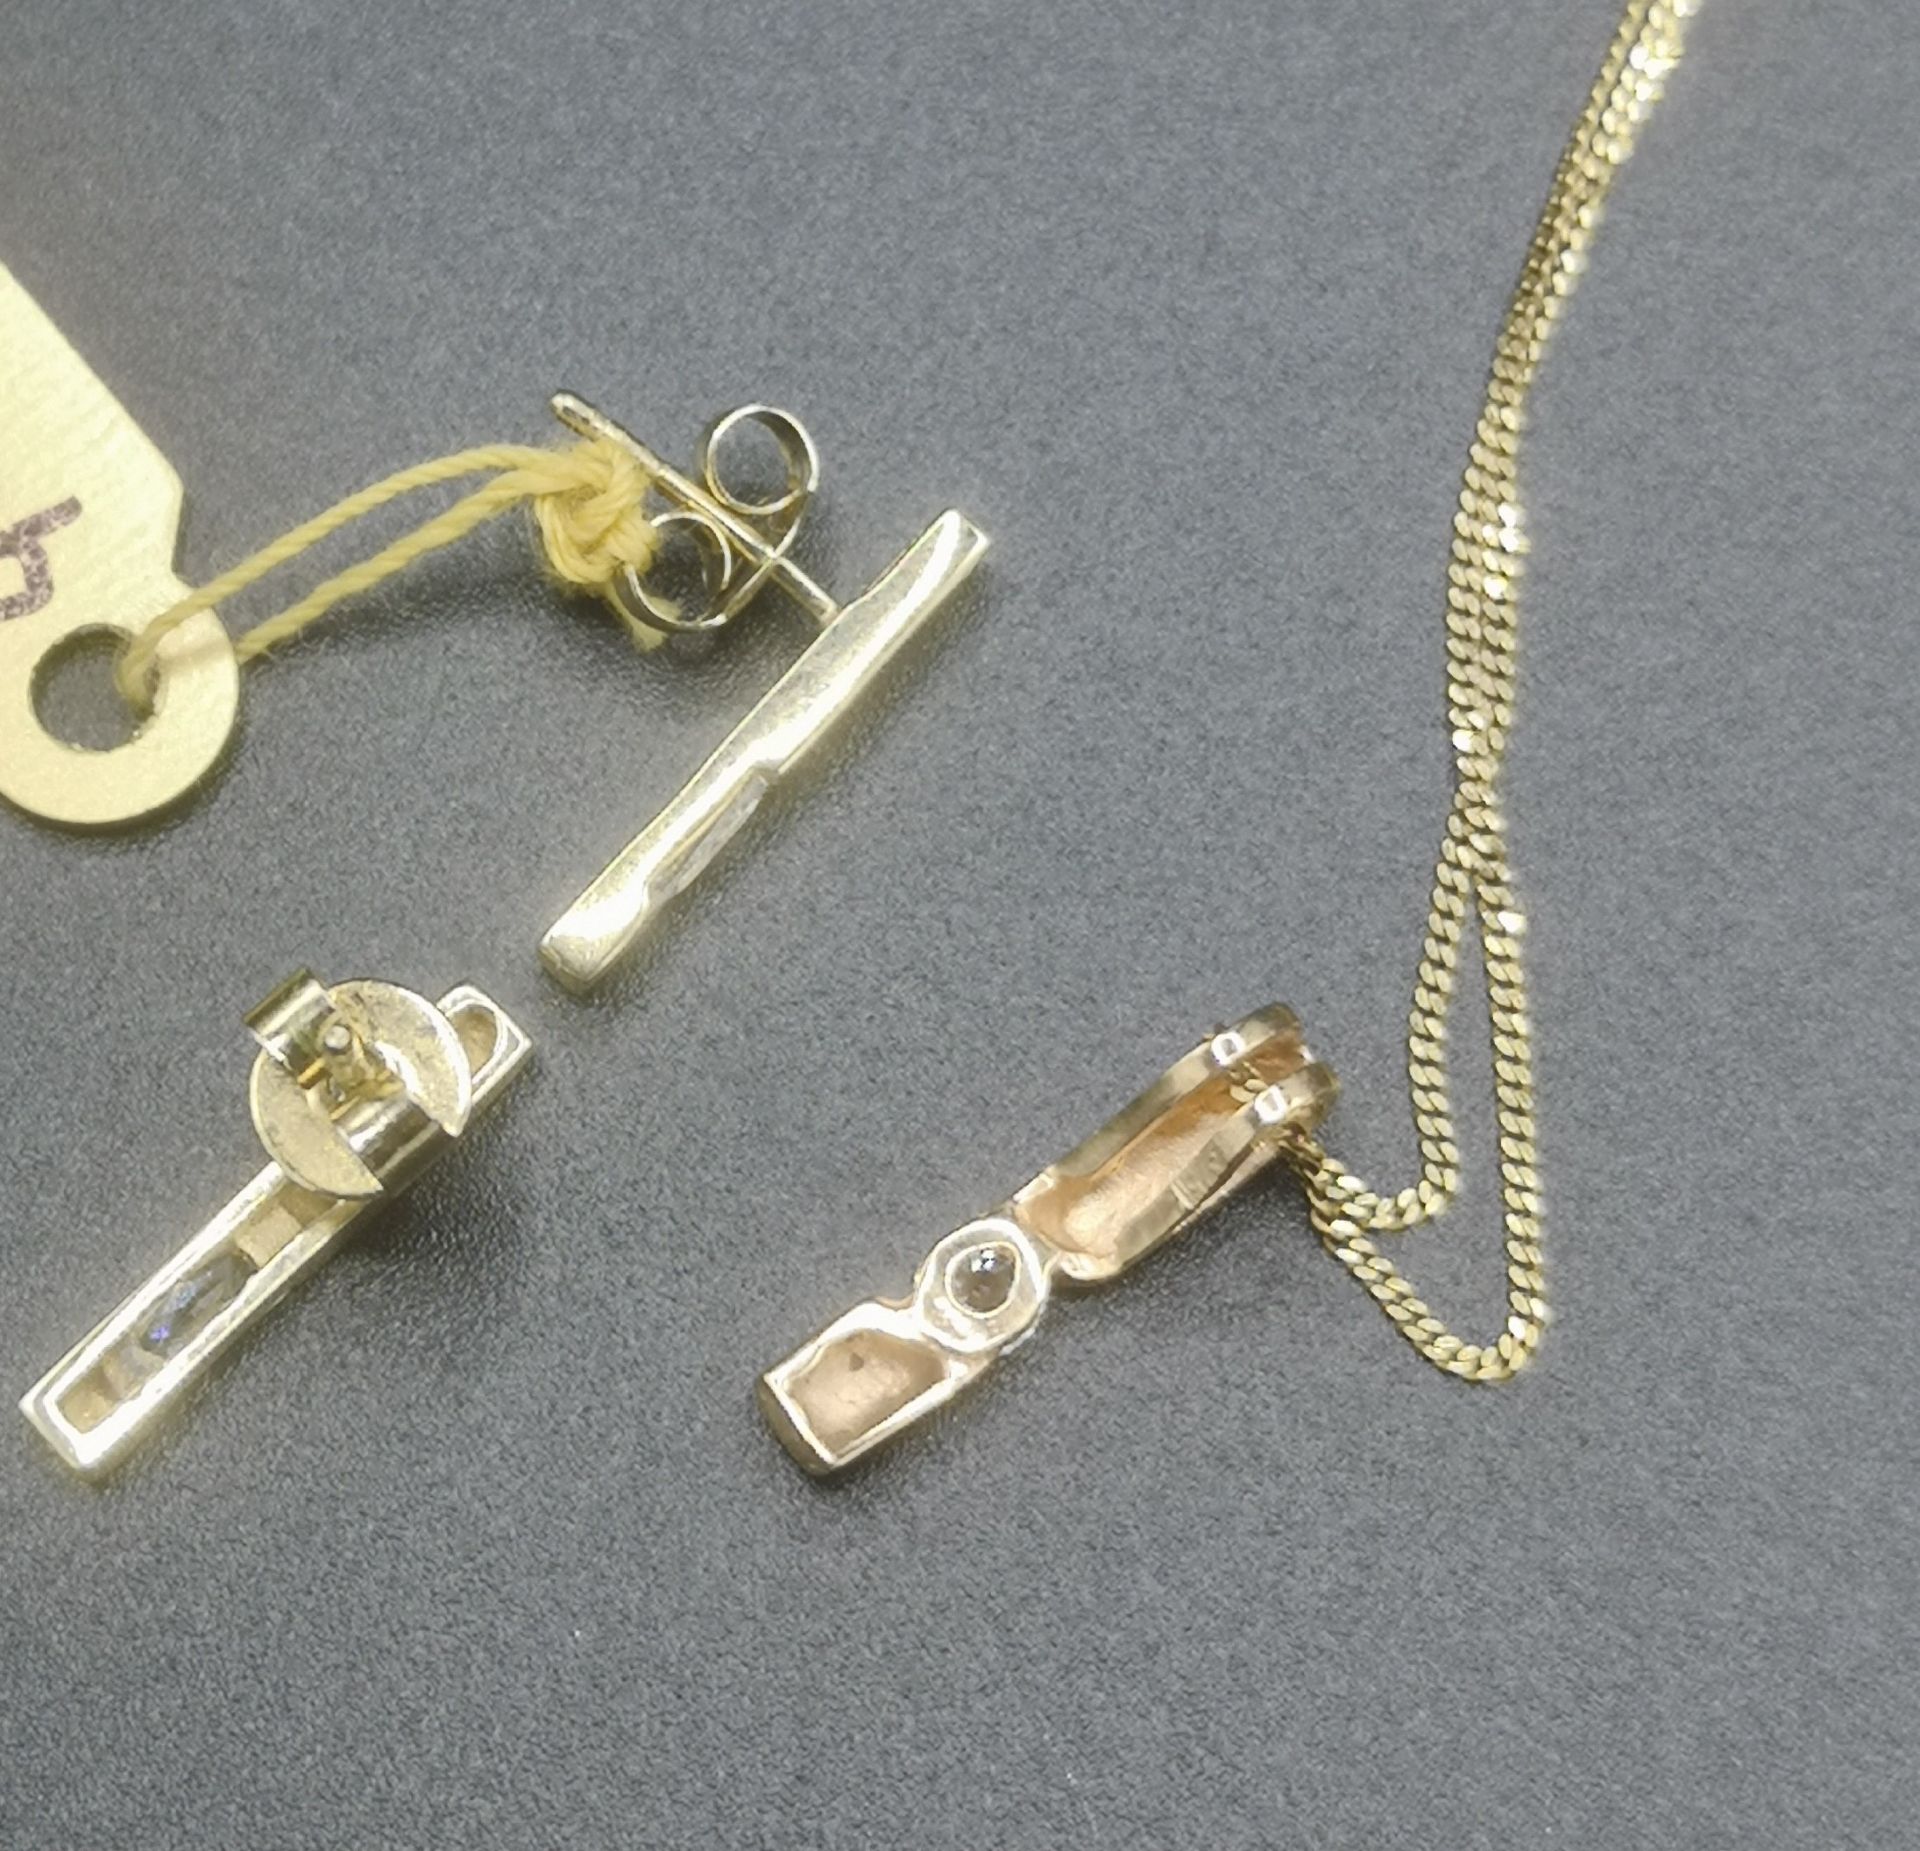 9ct gold chain and pendant, with matching 9ct earrings